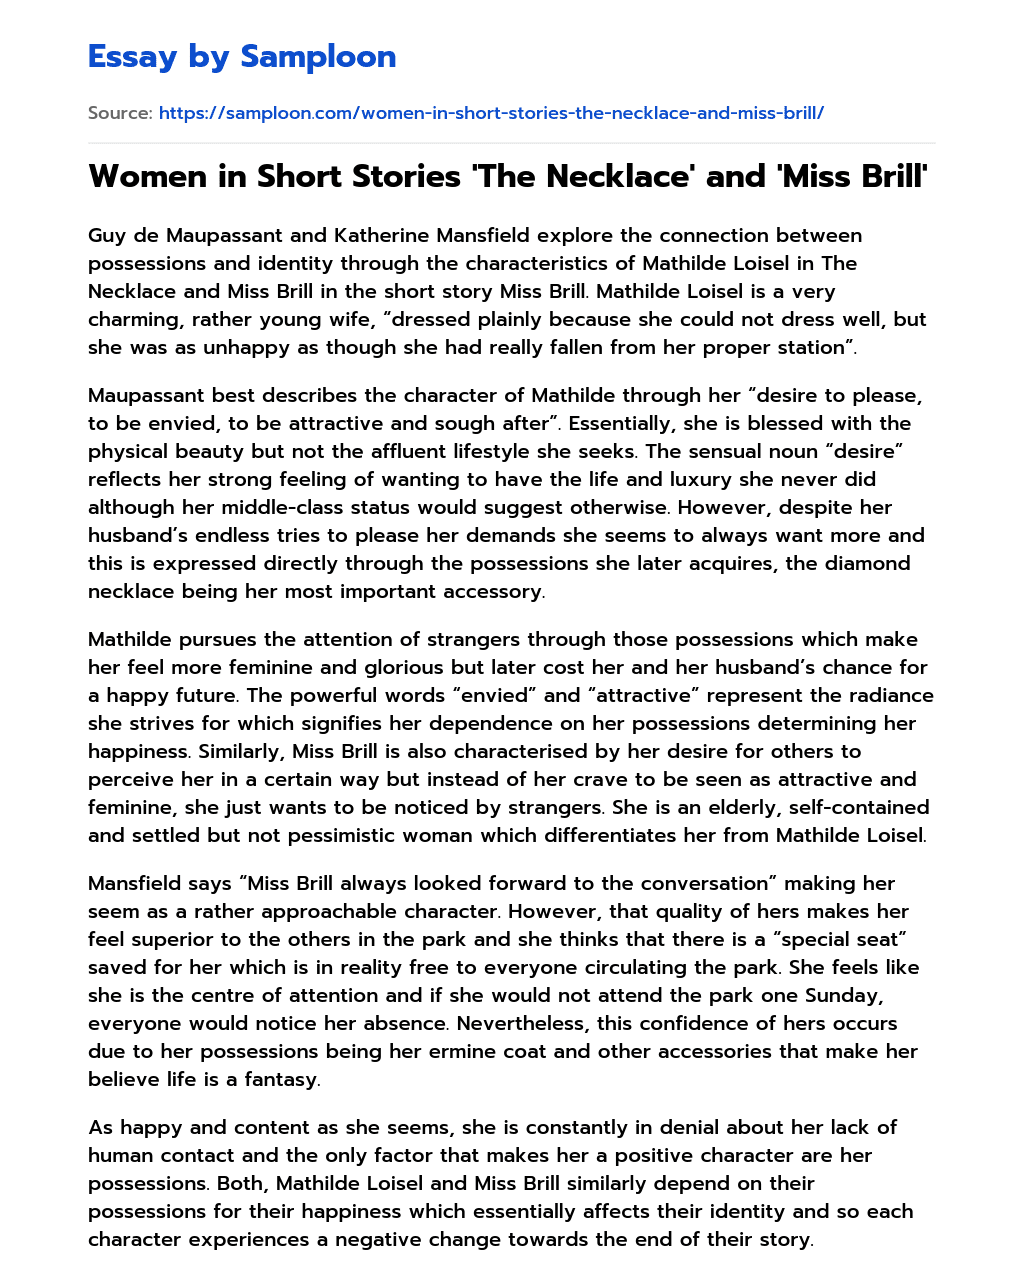 Women in Short Stories ‘The Necklace’ and ‘Miss Brill’ essay